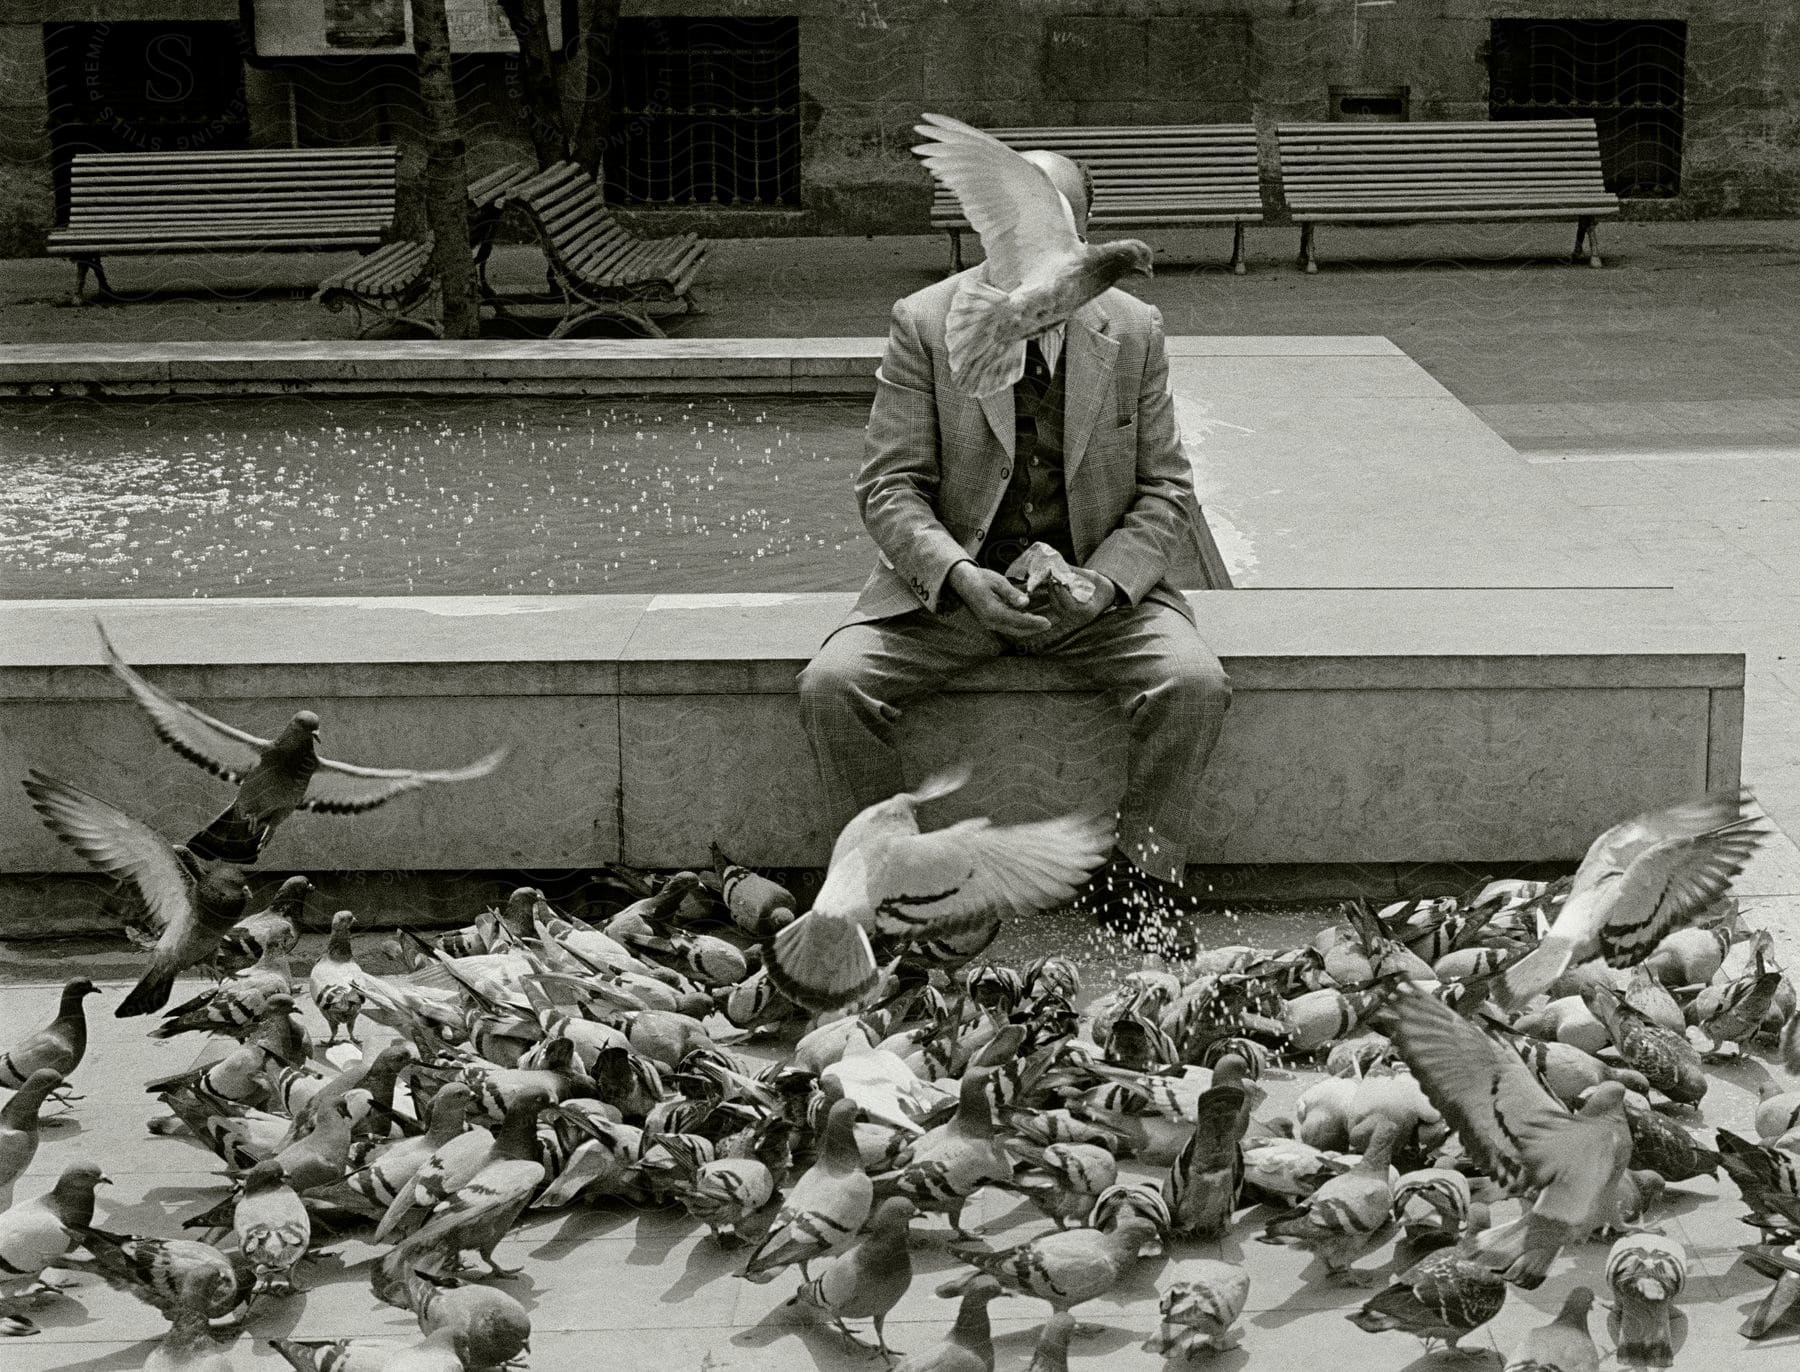 Stock photo of a man sitting on a bench with a water fence and many doves on the ground in front of him